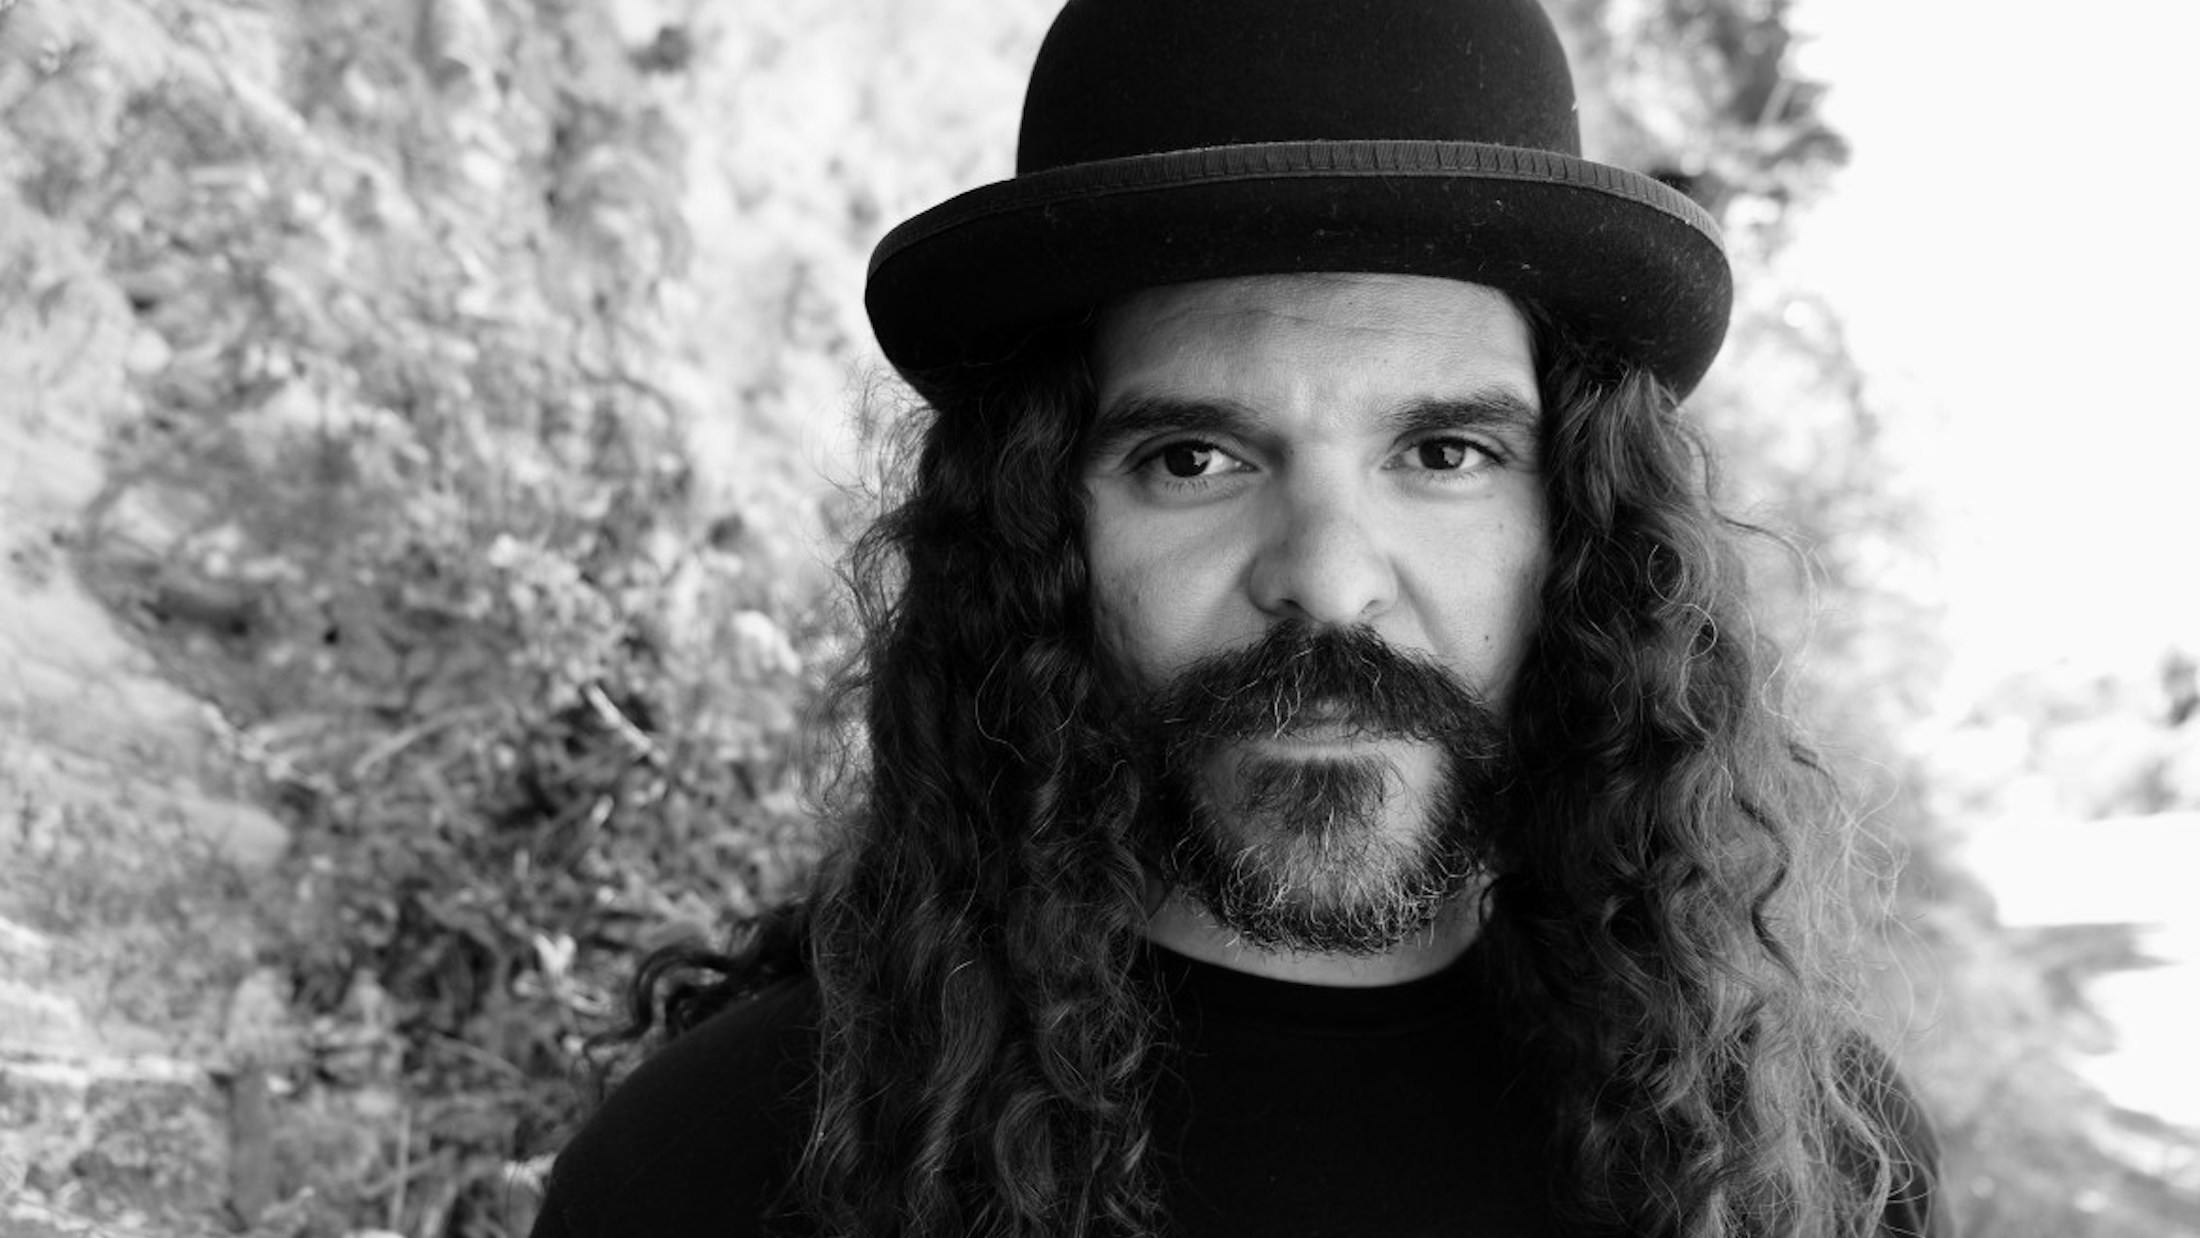 Brant Bjork Sets Up GoFundMe To Replace Instruments Following Robbery In Sweden